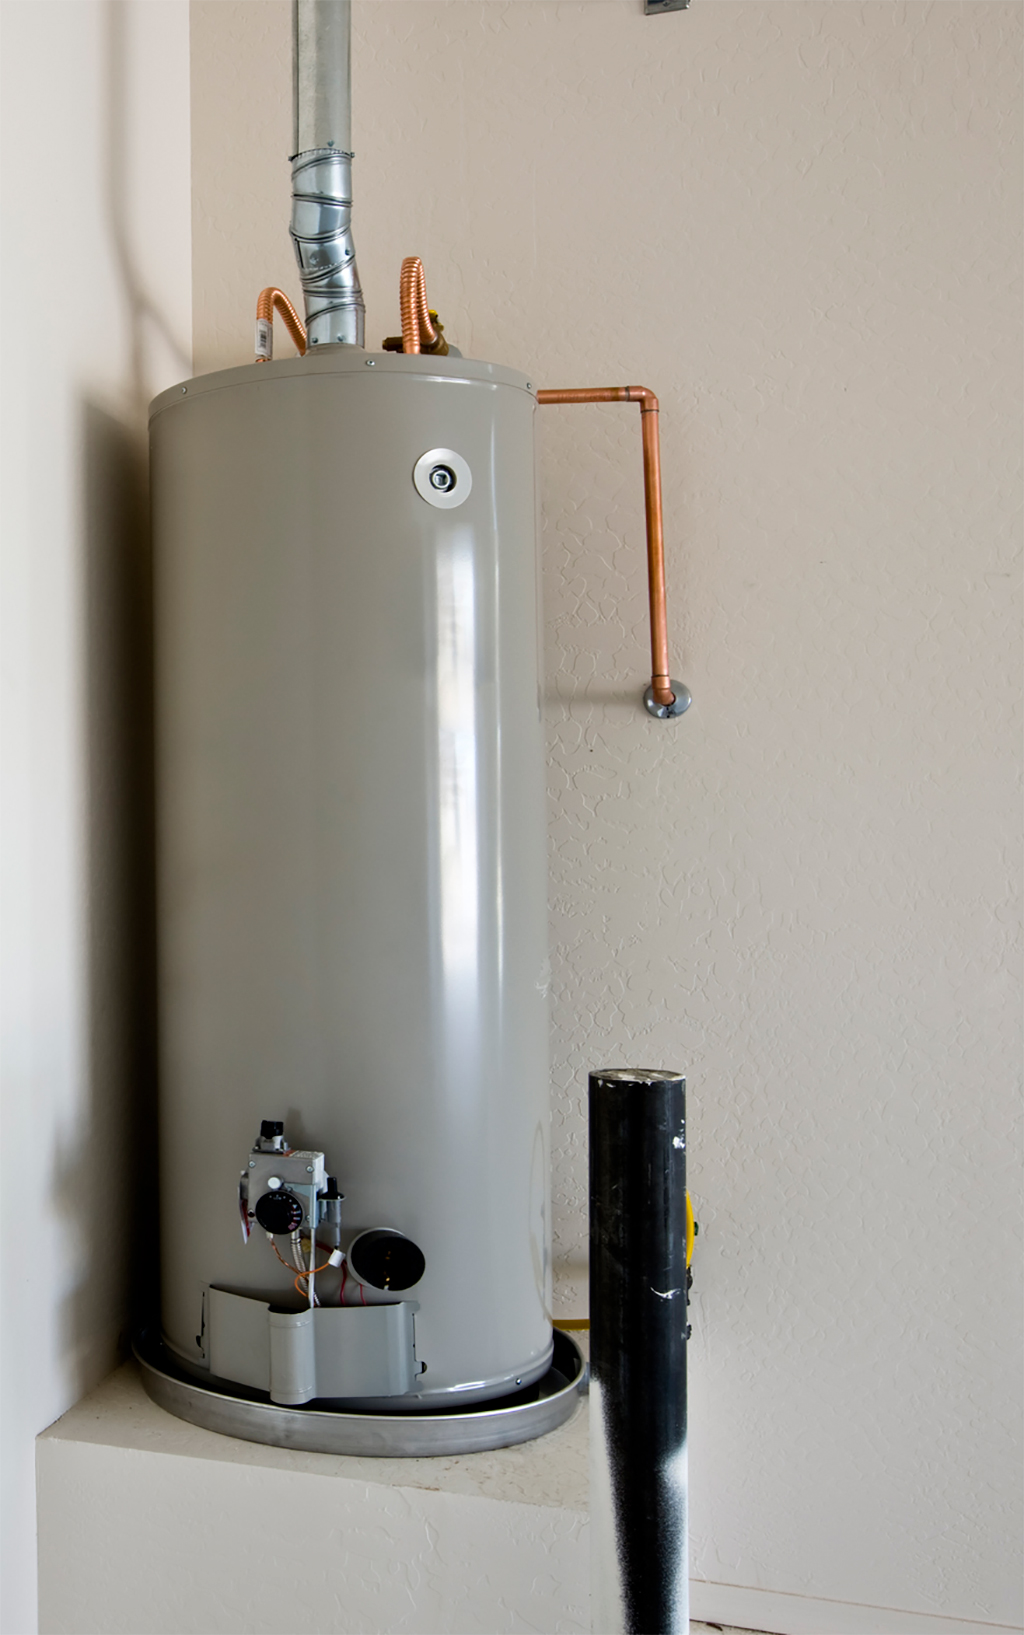 Are You Getting A New Water Heater? Call A Plumber Today | Katy, TX